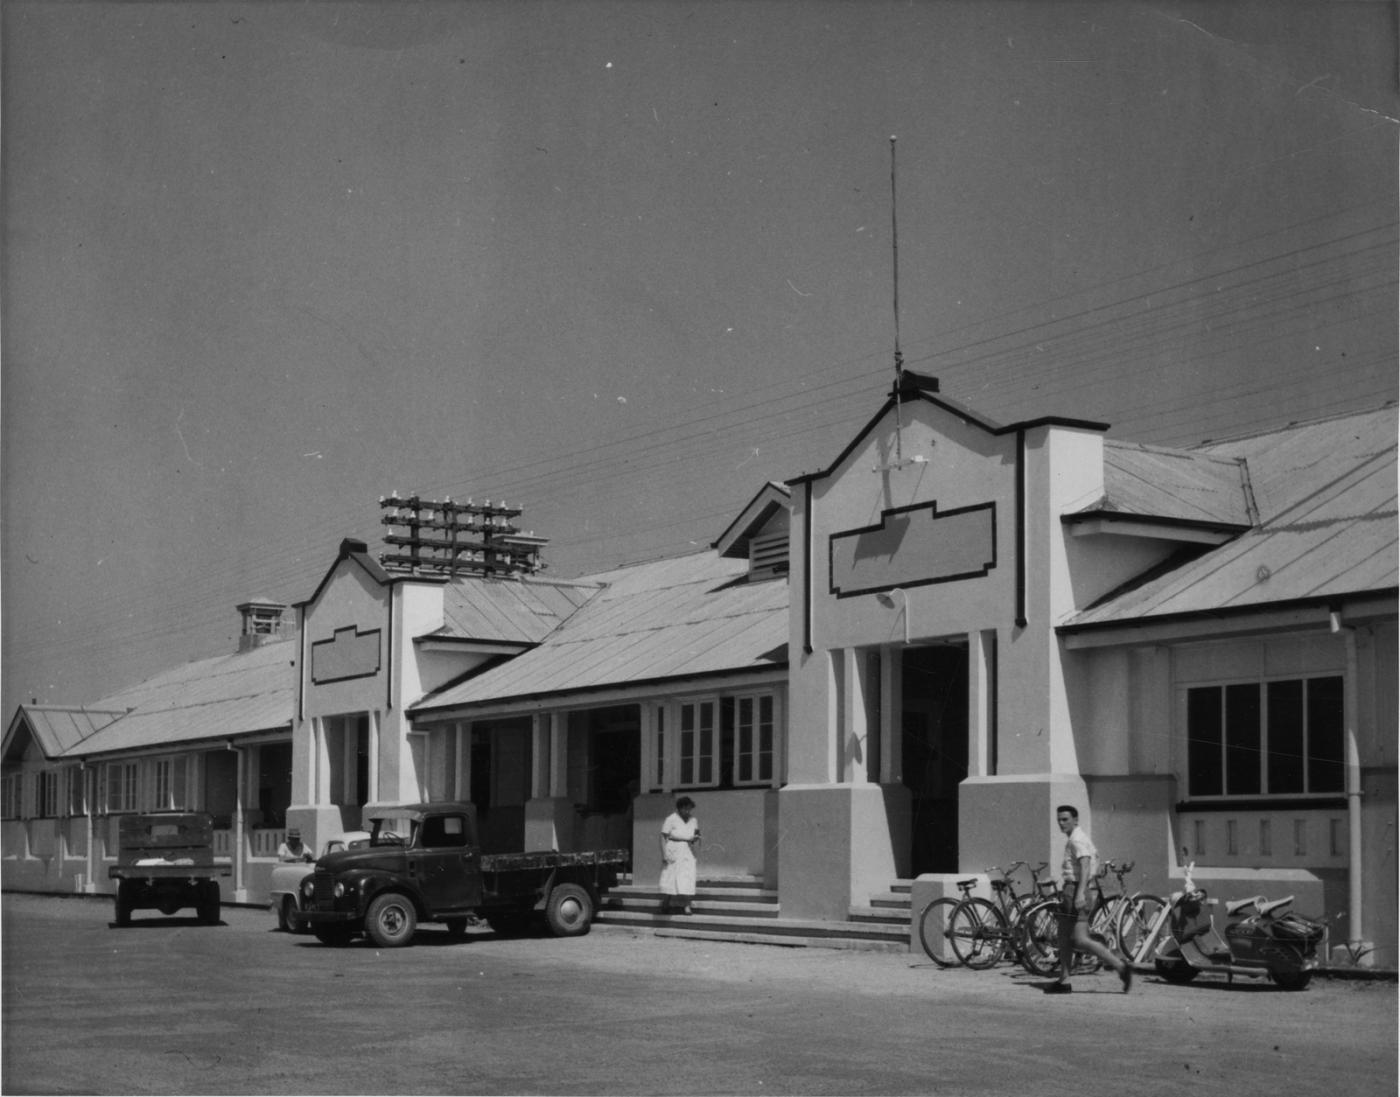 Exterior of the railway station in Mackay, made of wood